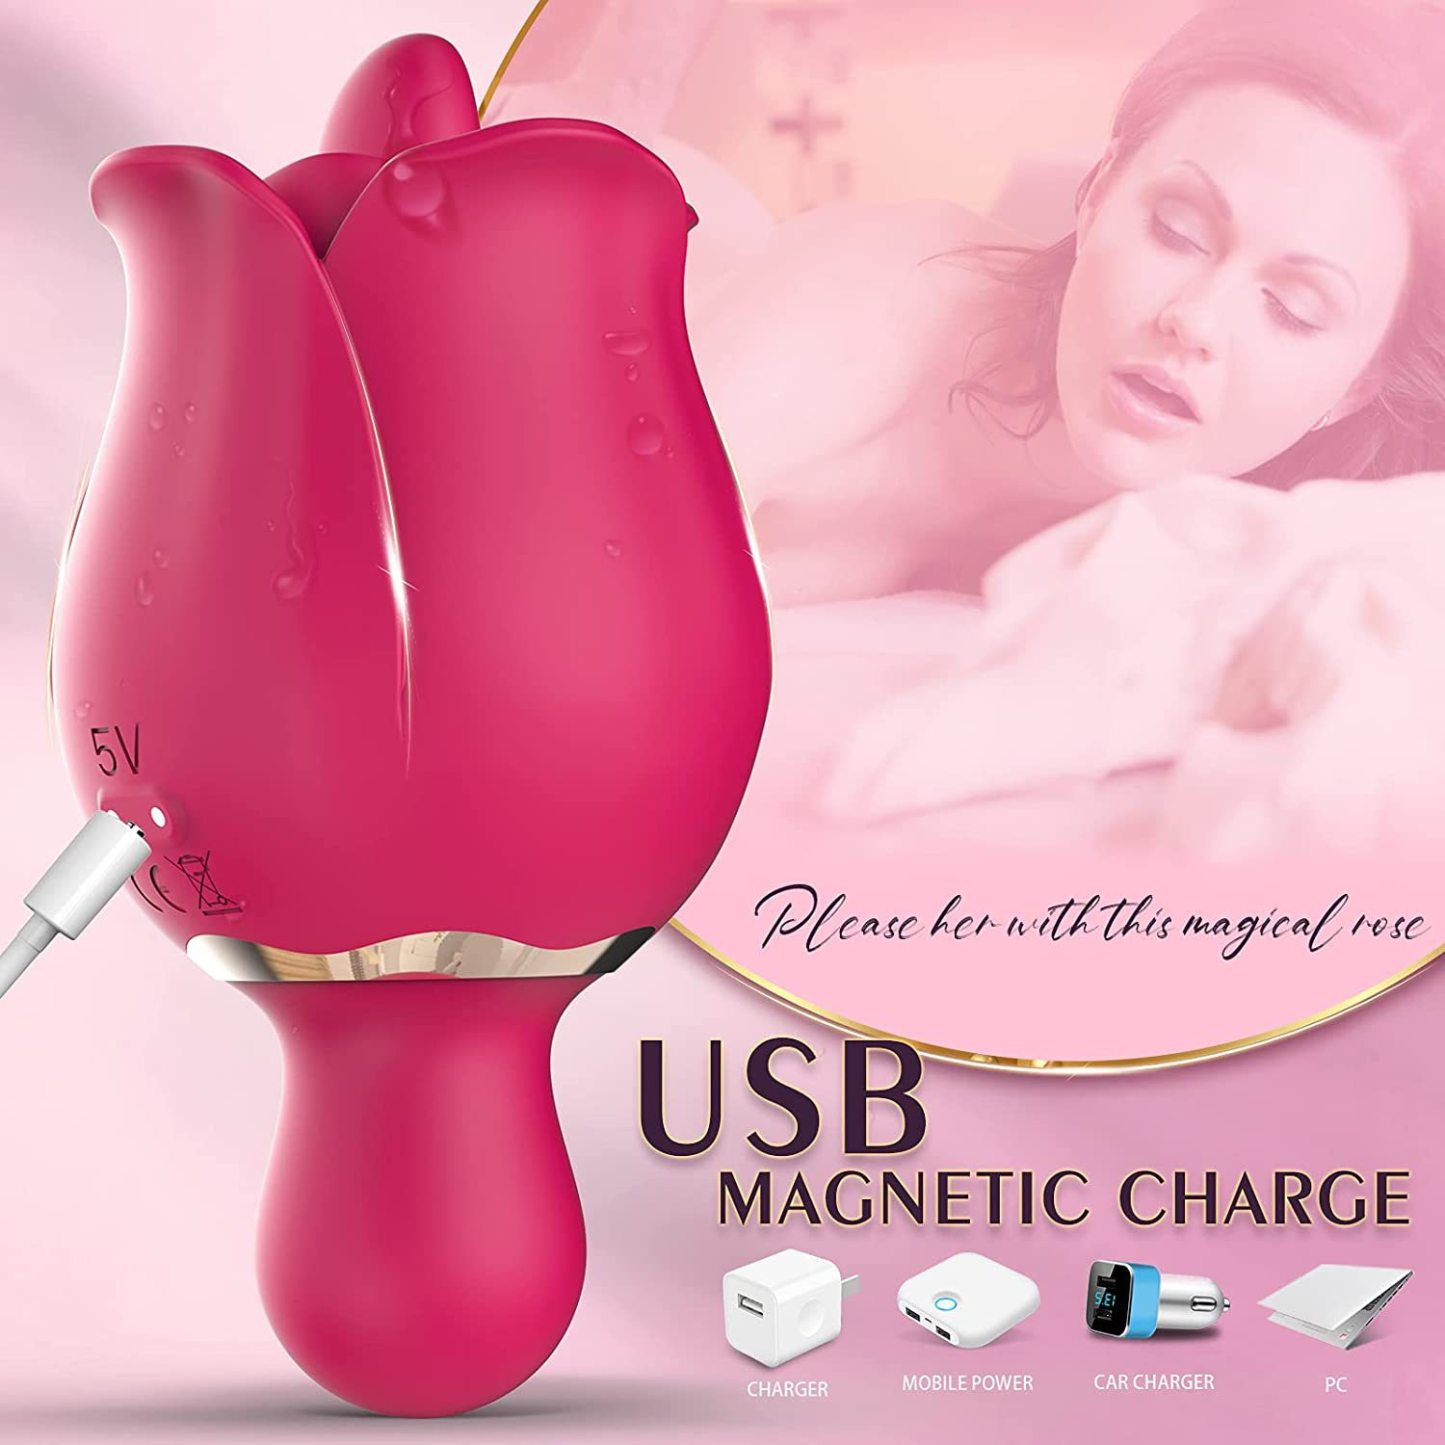 Licking Vibrator Rose Sex Toy with 9 Pleasure Modes, Adult Sex Toys